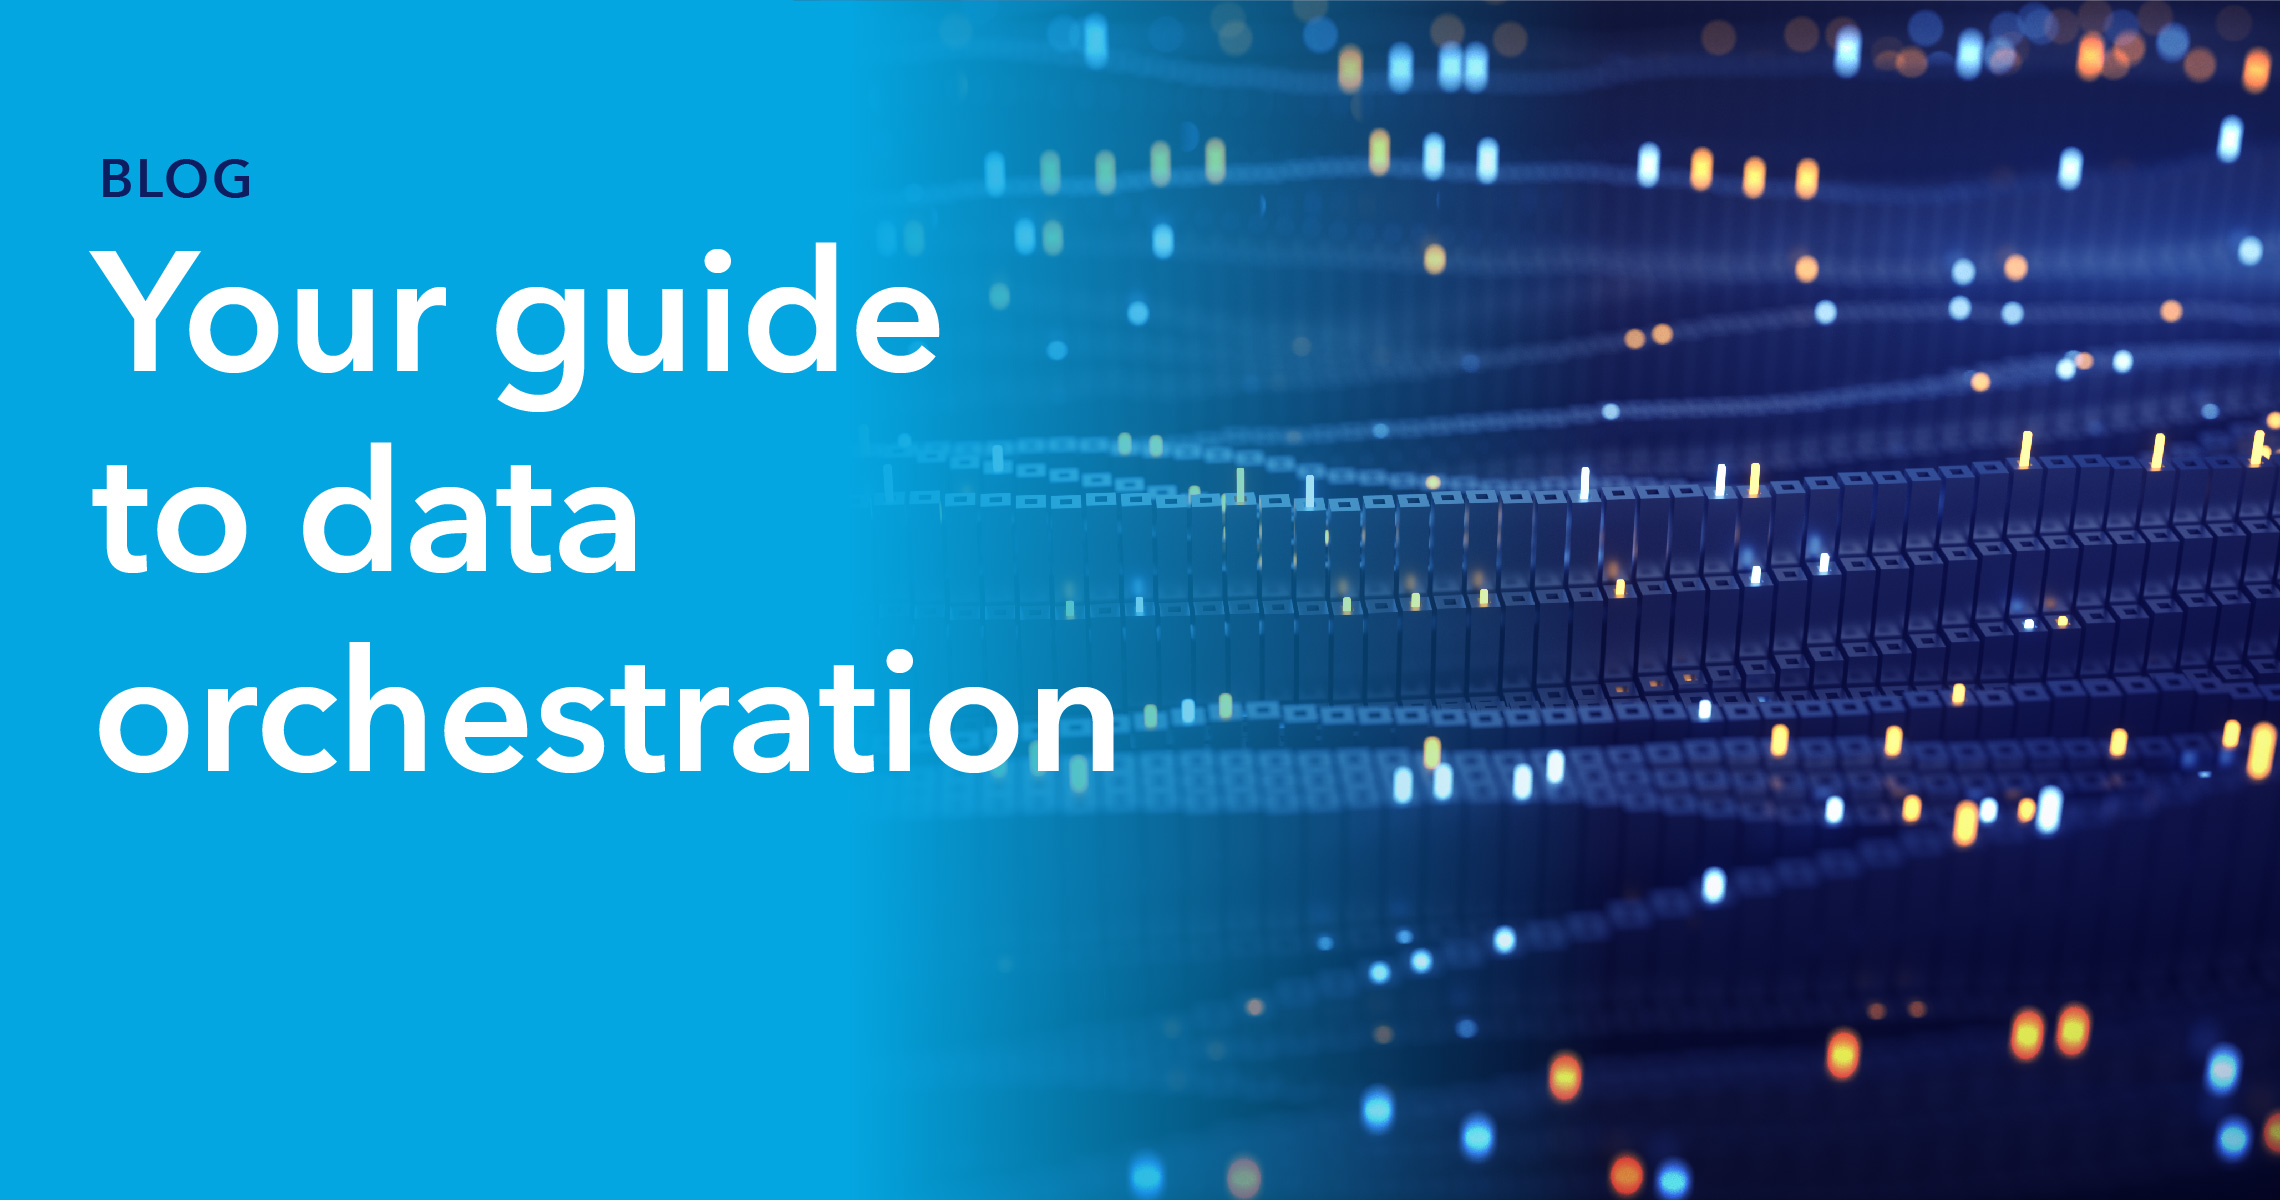 Blog header image: Your guide to data orchestration